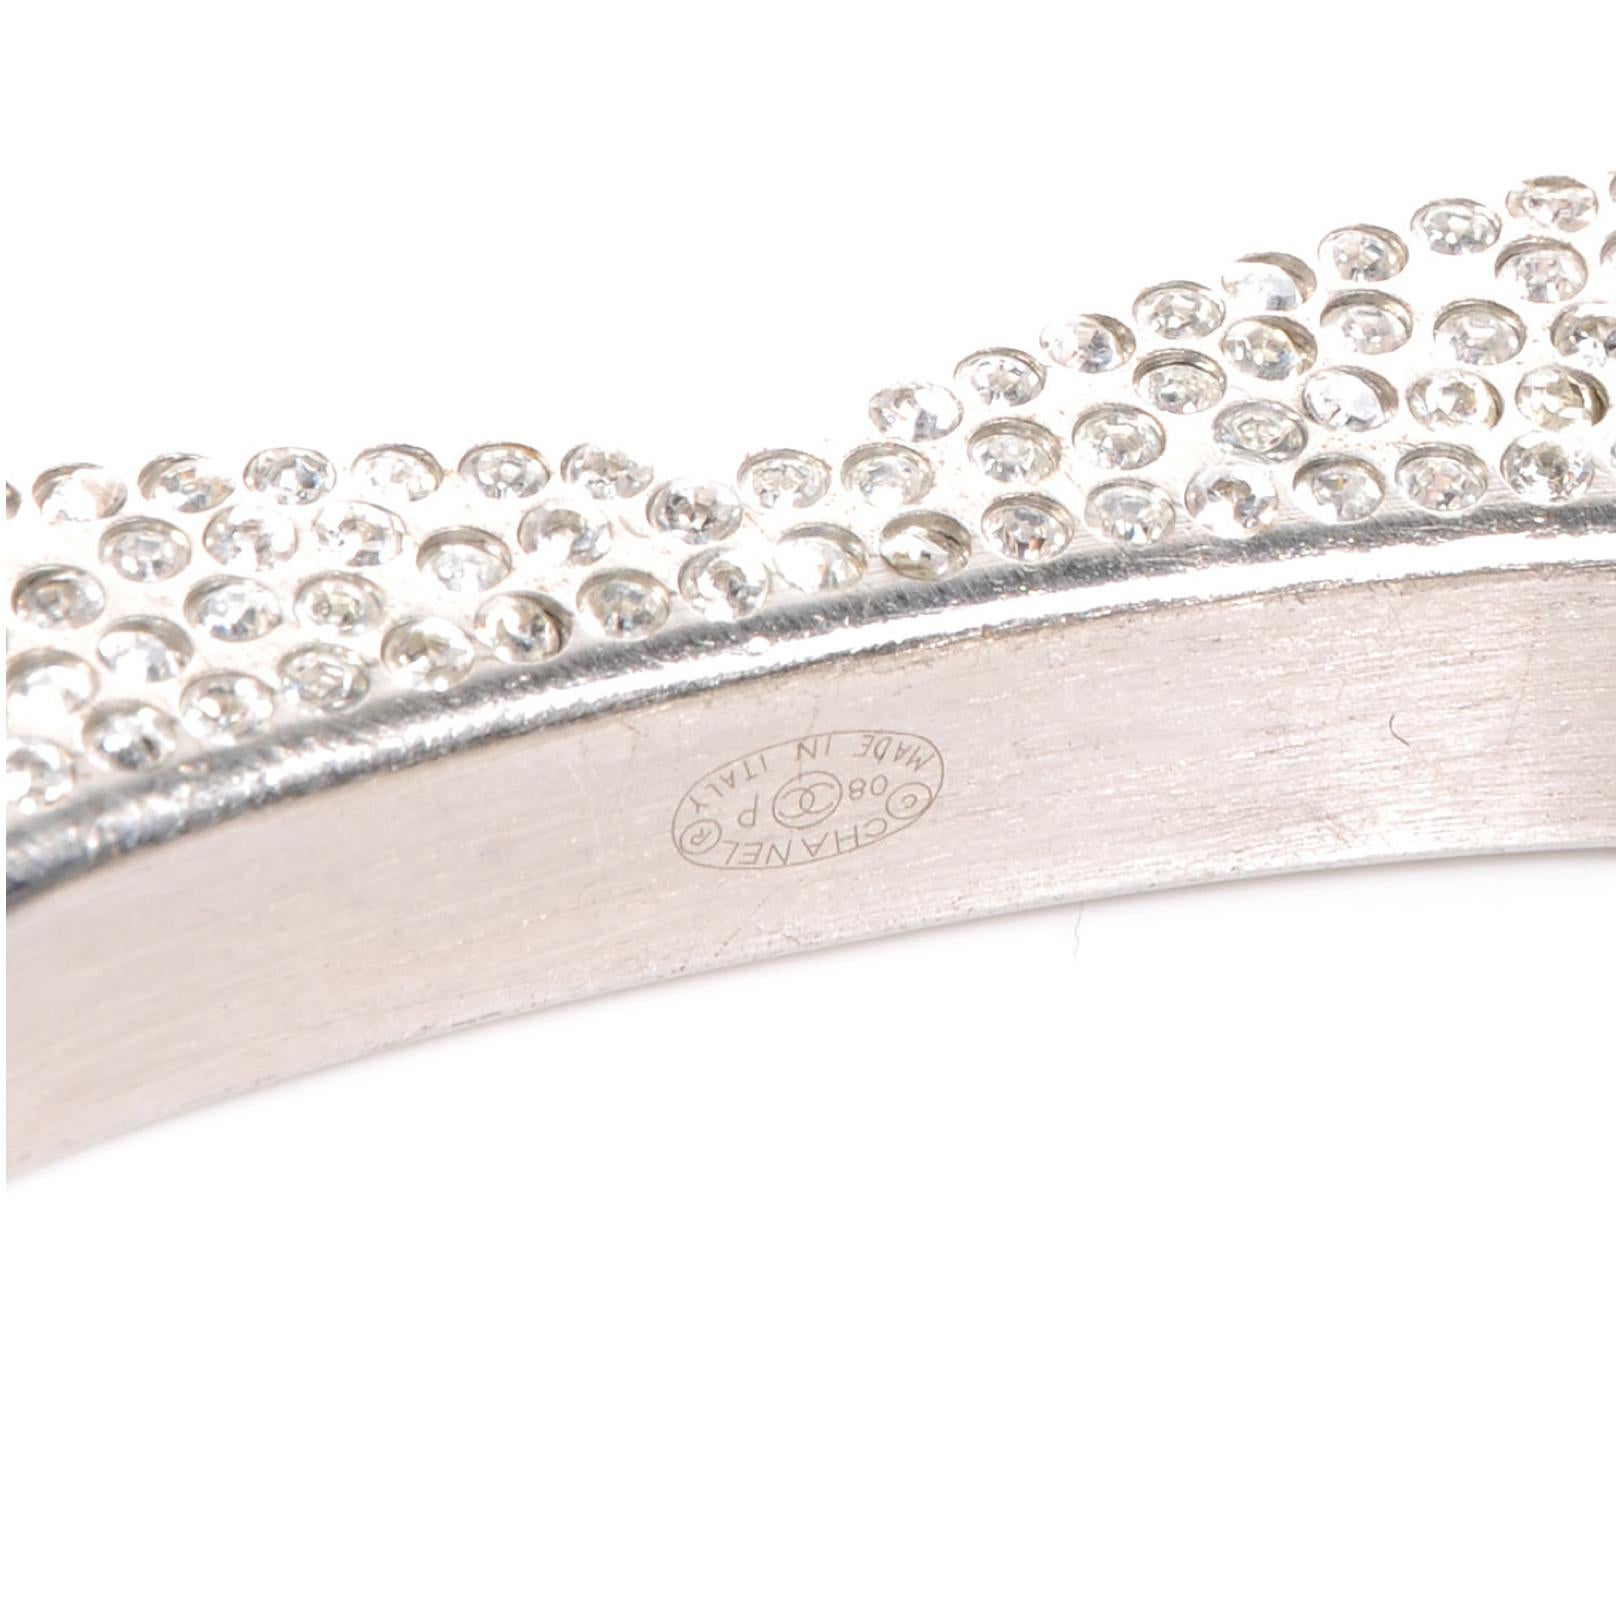 This bracelet has a heart shape and is encrusted with Swarovski crystals. “Coco Chanel” engraved on the sides.

COLOR: Silver
MATERIAL: Metal, crystal.
MEASURES: Inside opening: 2.5” by 2”. Full bracelet diameter 3”, full circumference 9”
ITEM CODE: